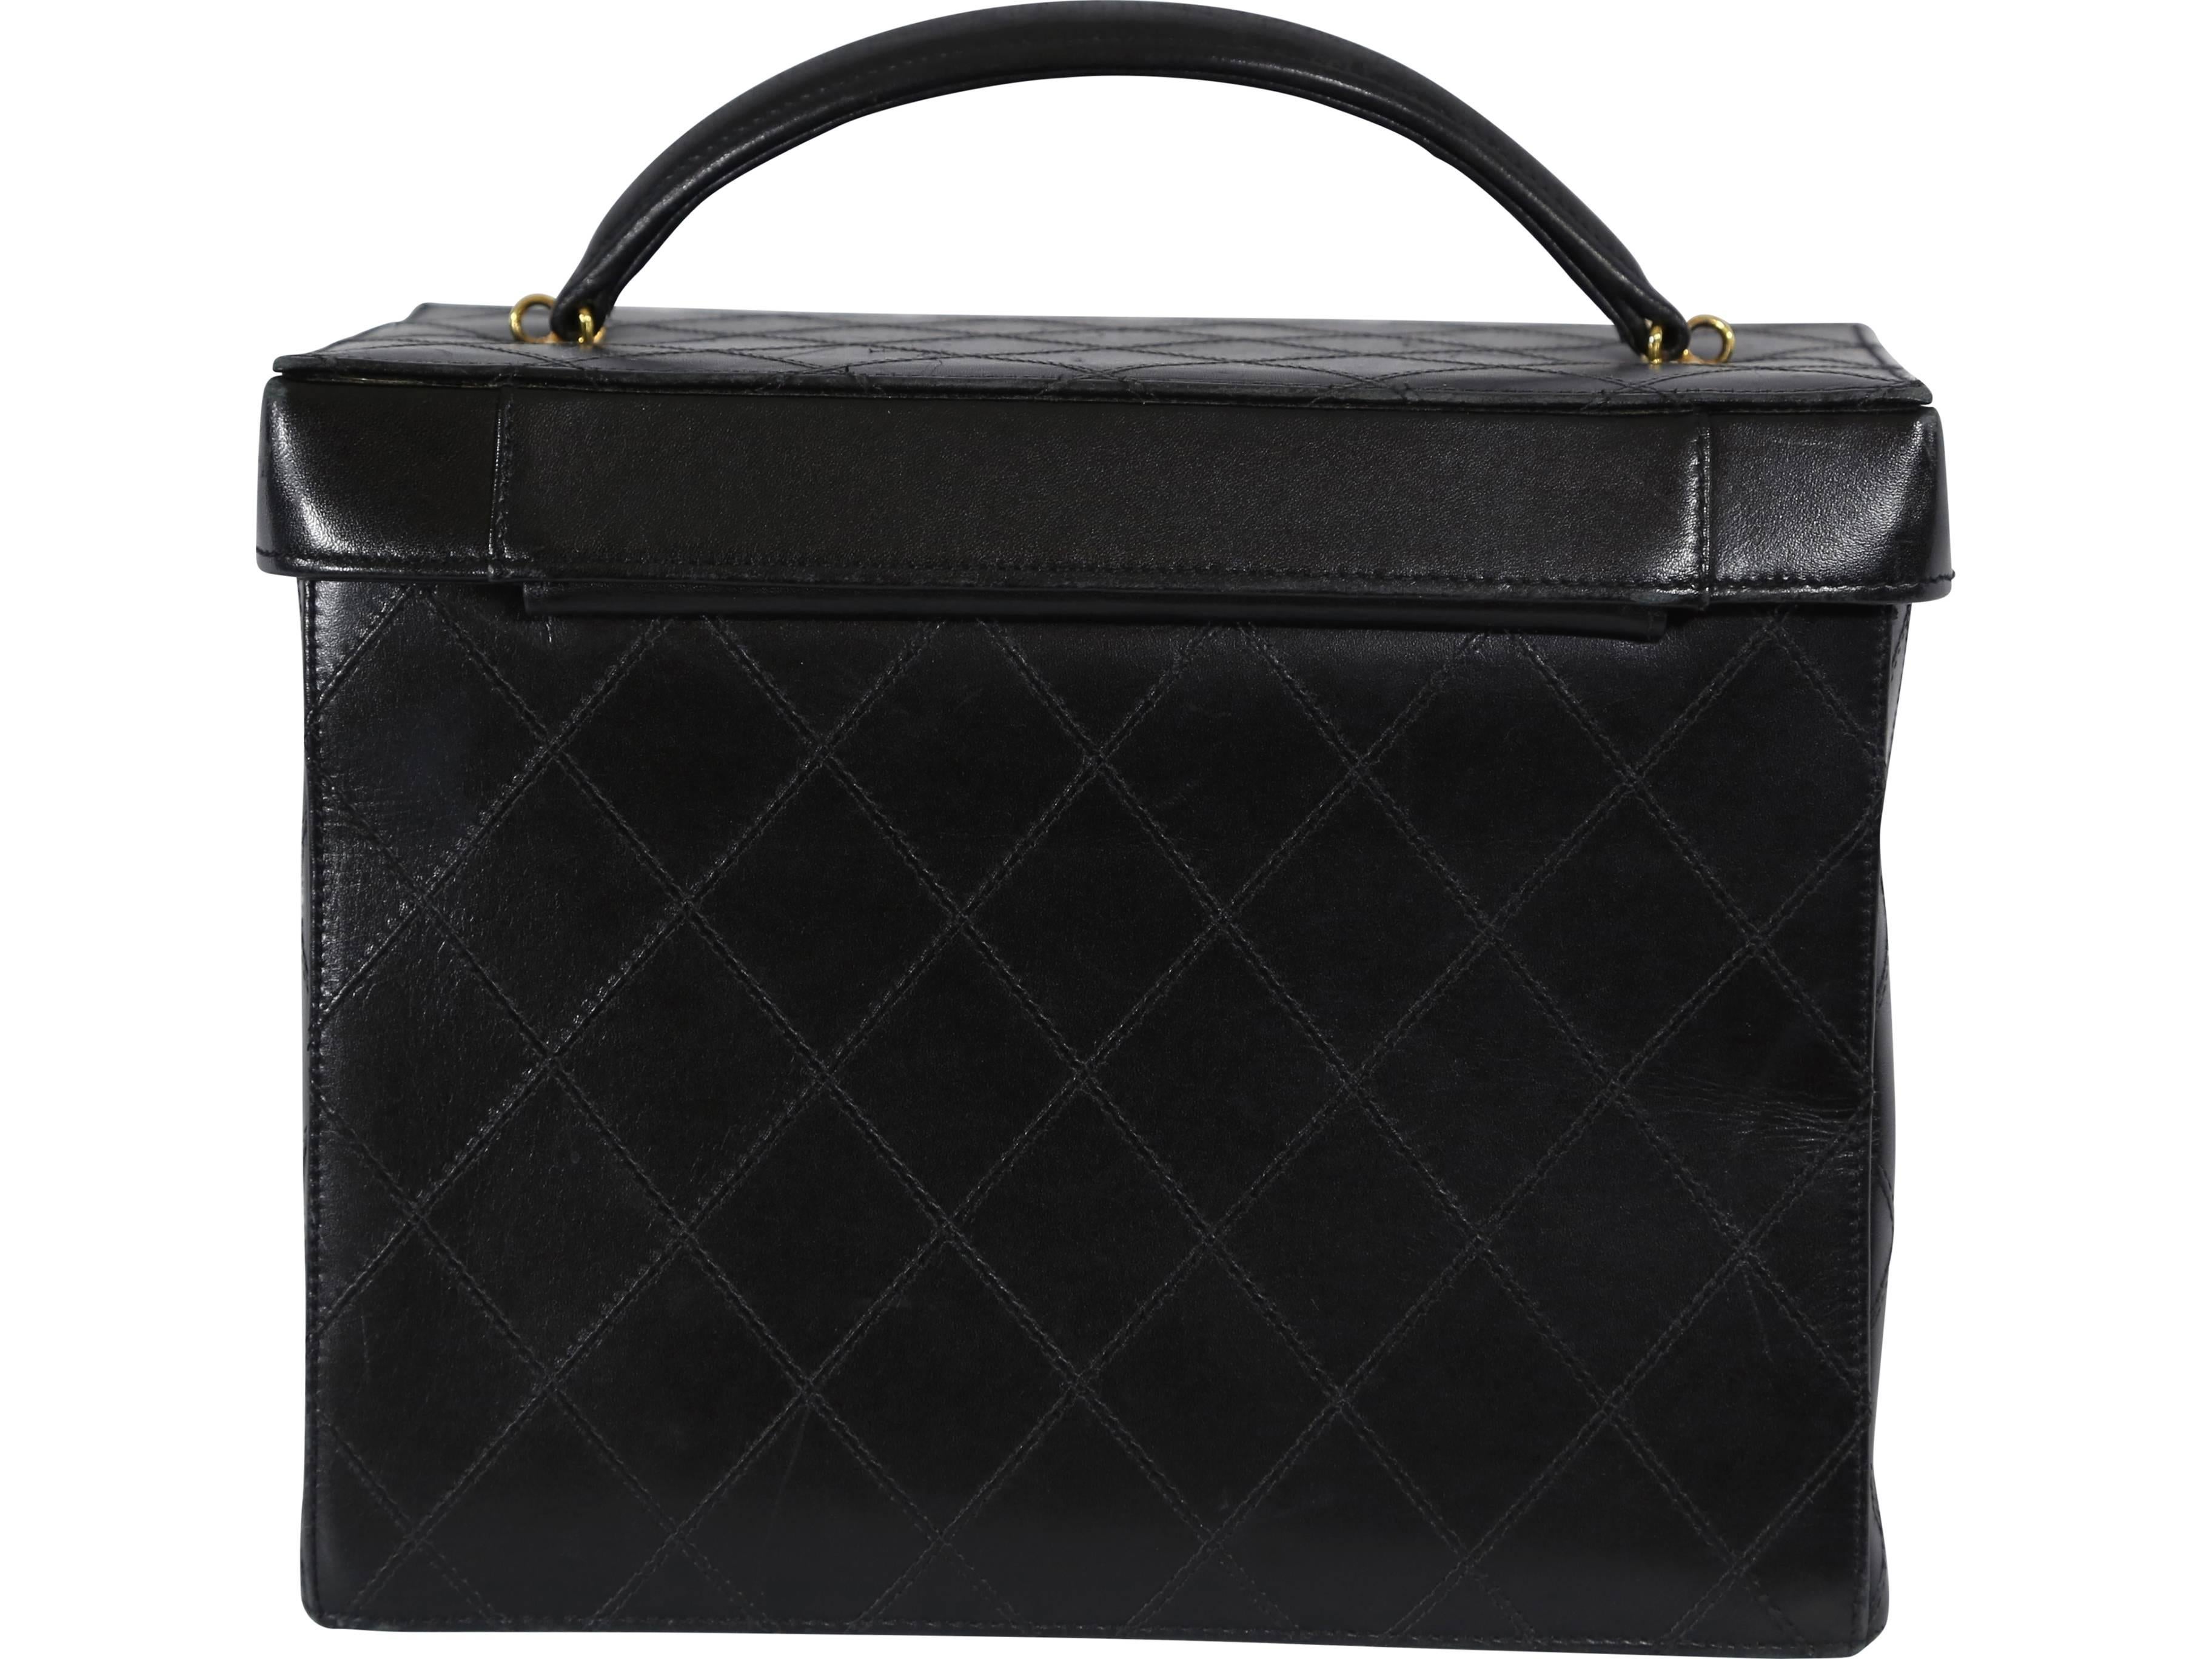 Chanel Black Leather Trunk Case Handbag In Excellent Condition In New York, NY